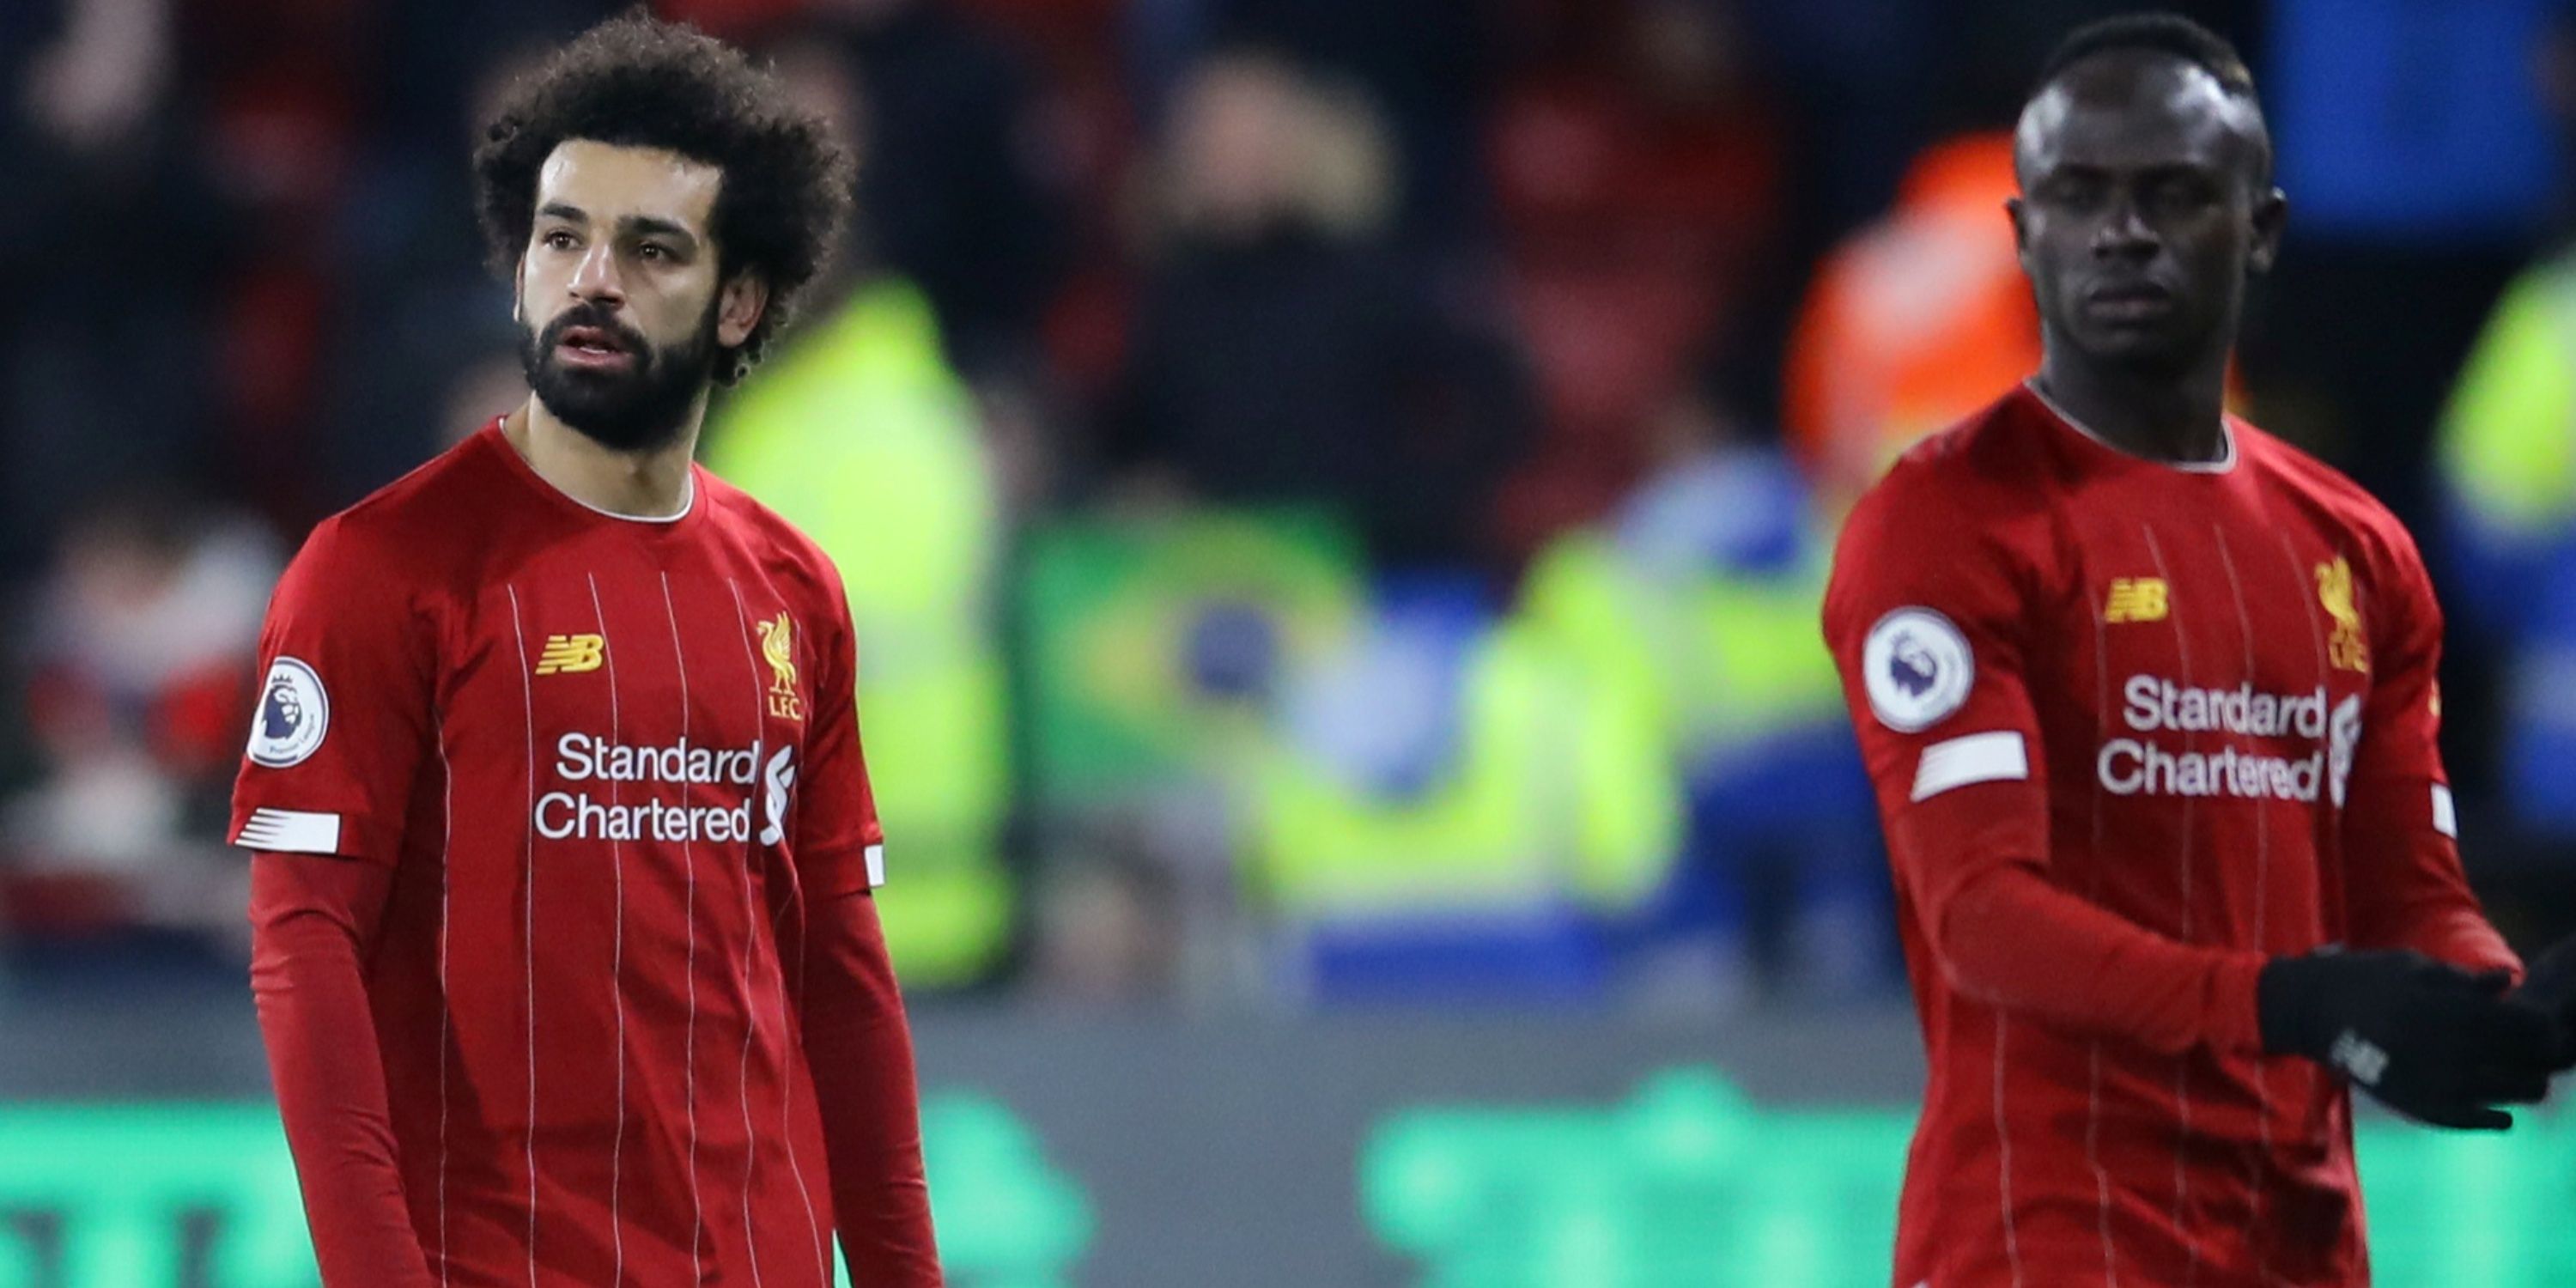 Liverpool's Sadio Mane and Mohamed Salah look dejected